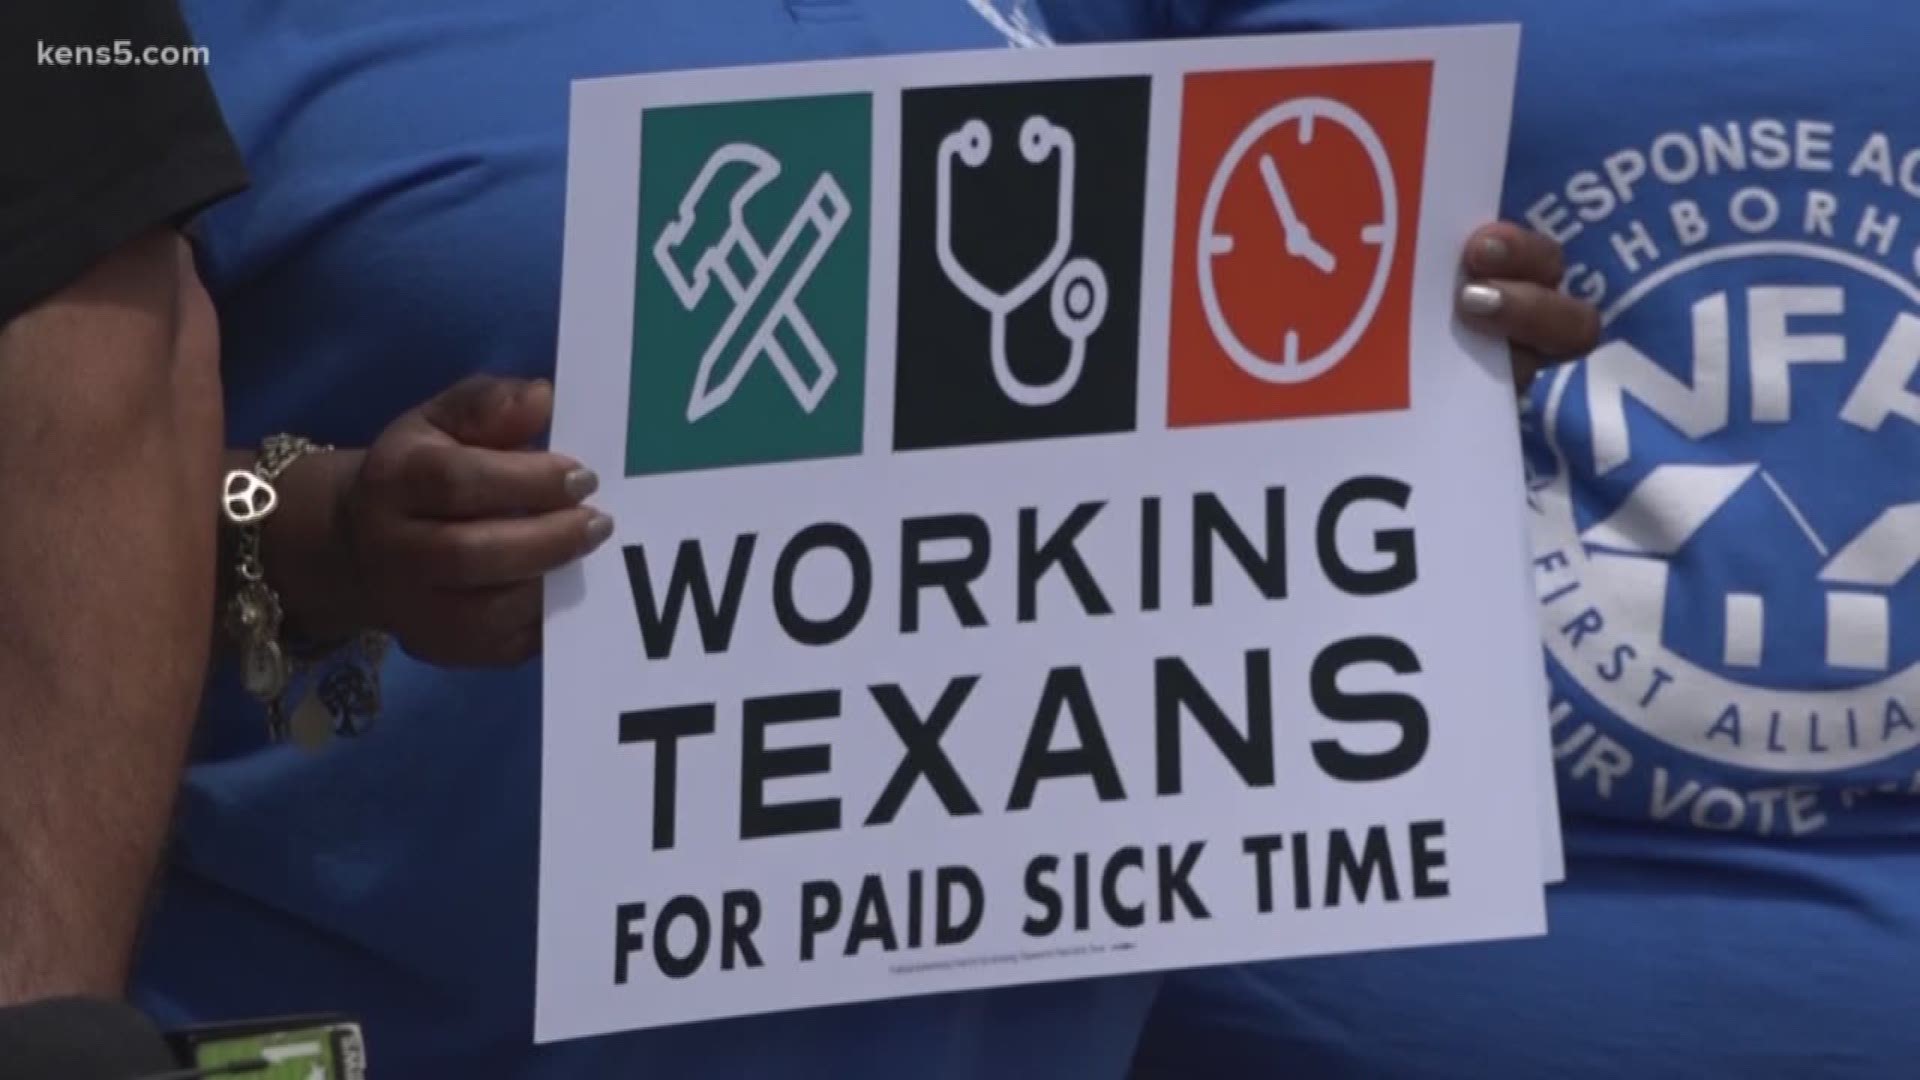 Texans for Paid Sick Time says that the organization collected enough signatures to get paid sick leave on San Antonio's ballot in November.